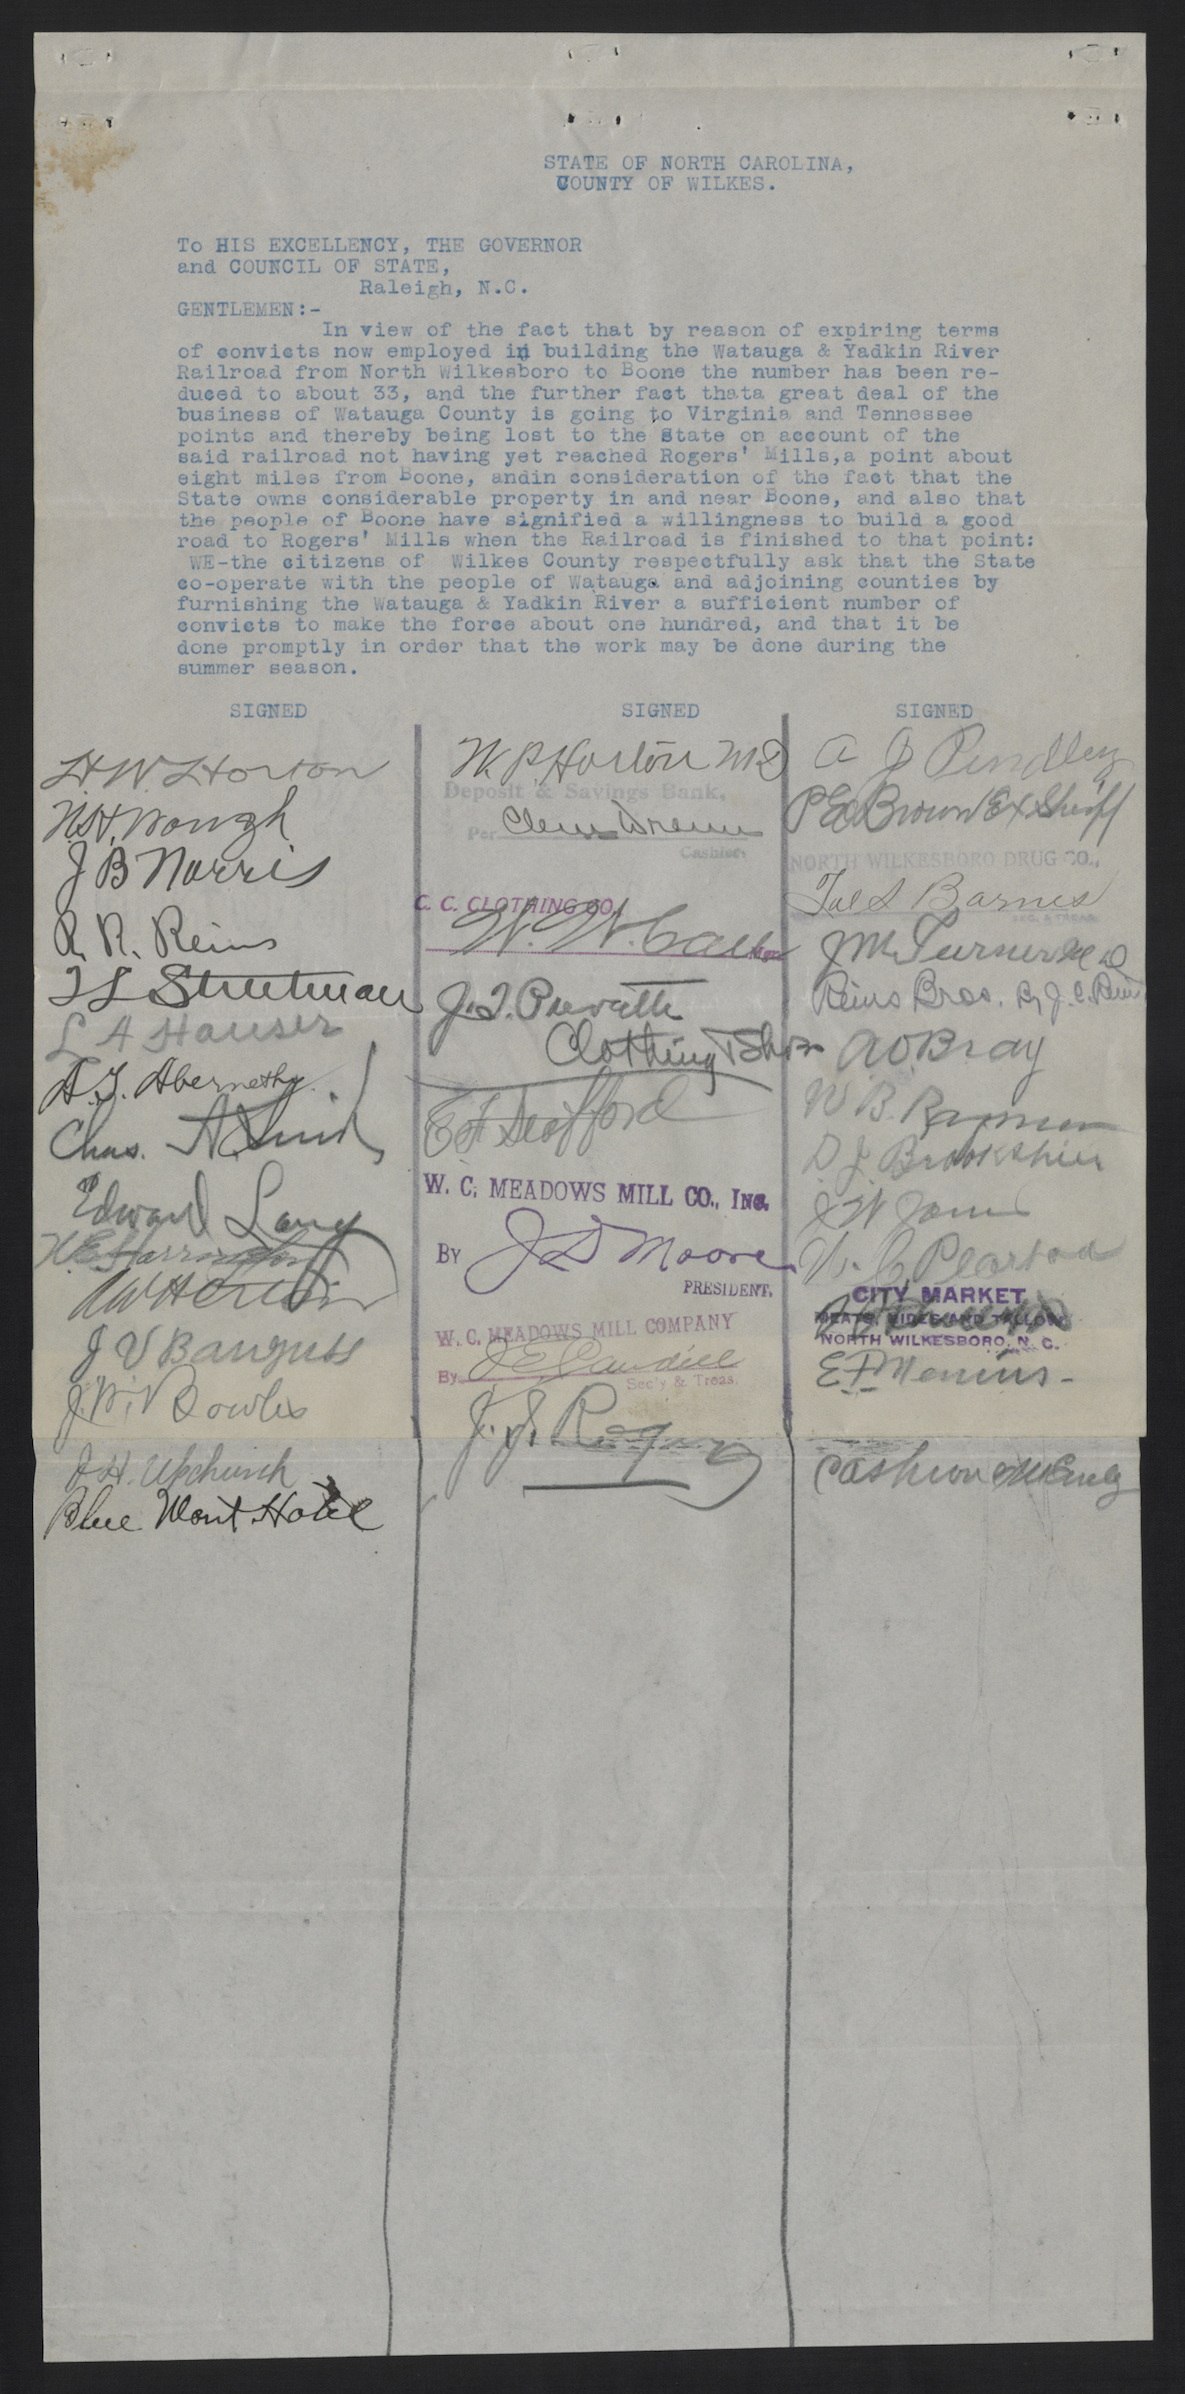 Petition from the Citizens of Wilkes County to Locke Craig and the Council of State, circa June 1916, page 3